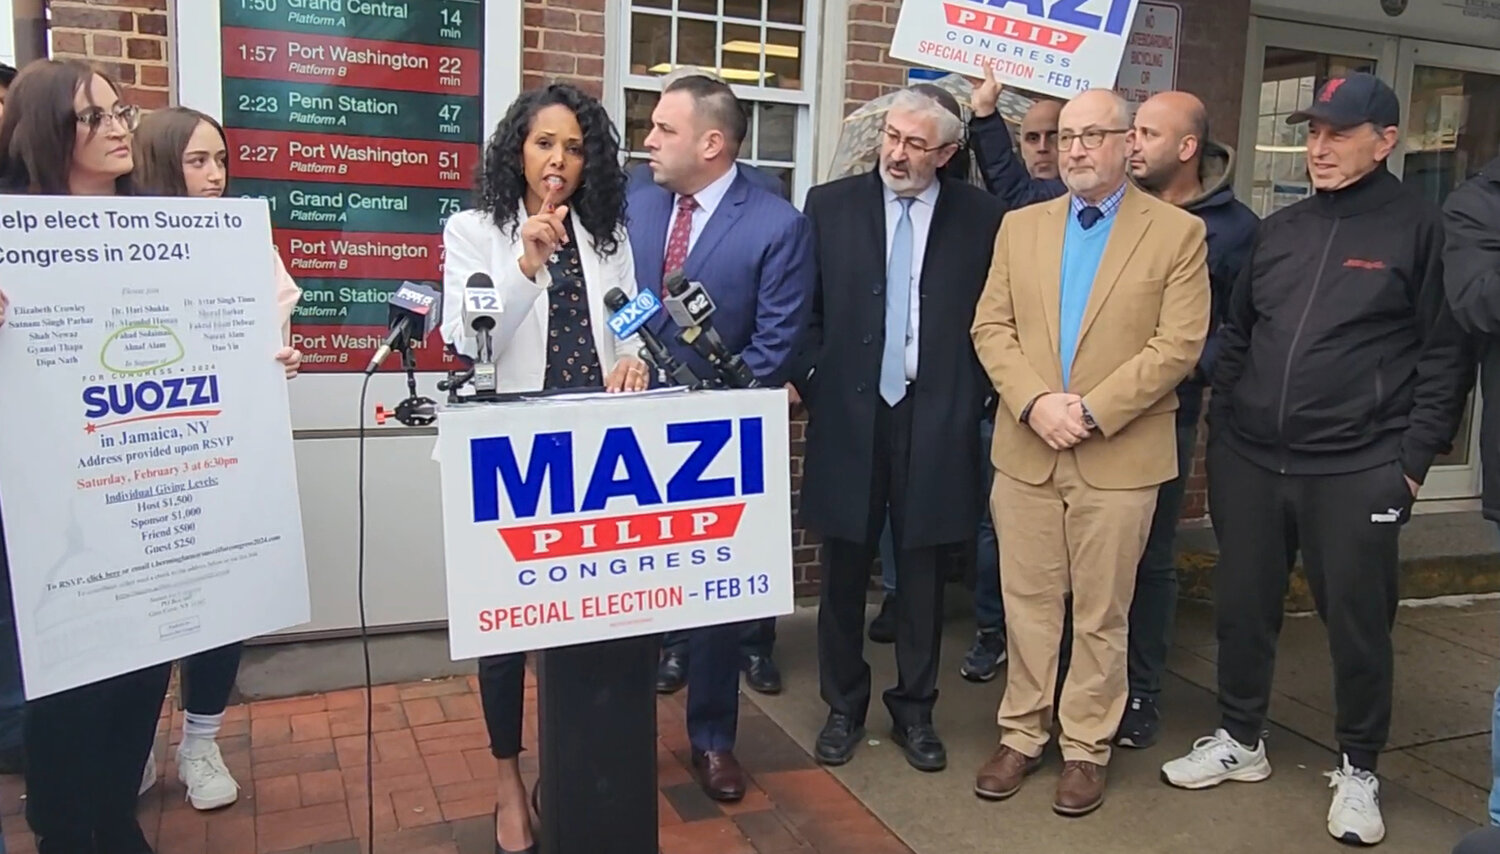 Mazi Pilip’s campaign says law-abiding citizens should have a route to have access to guns, but not automatic assault weapons.